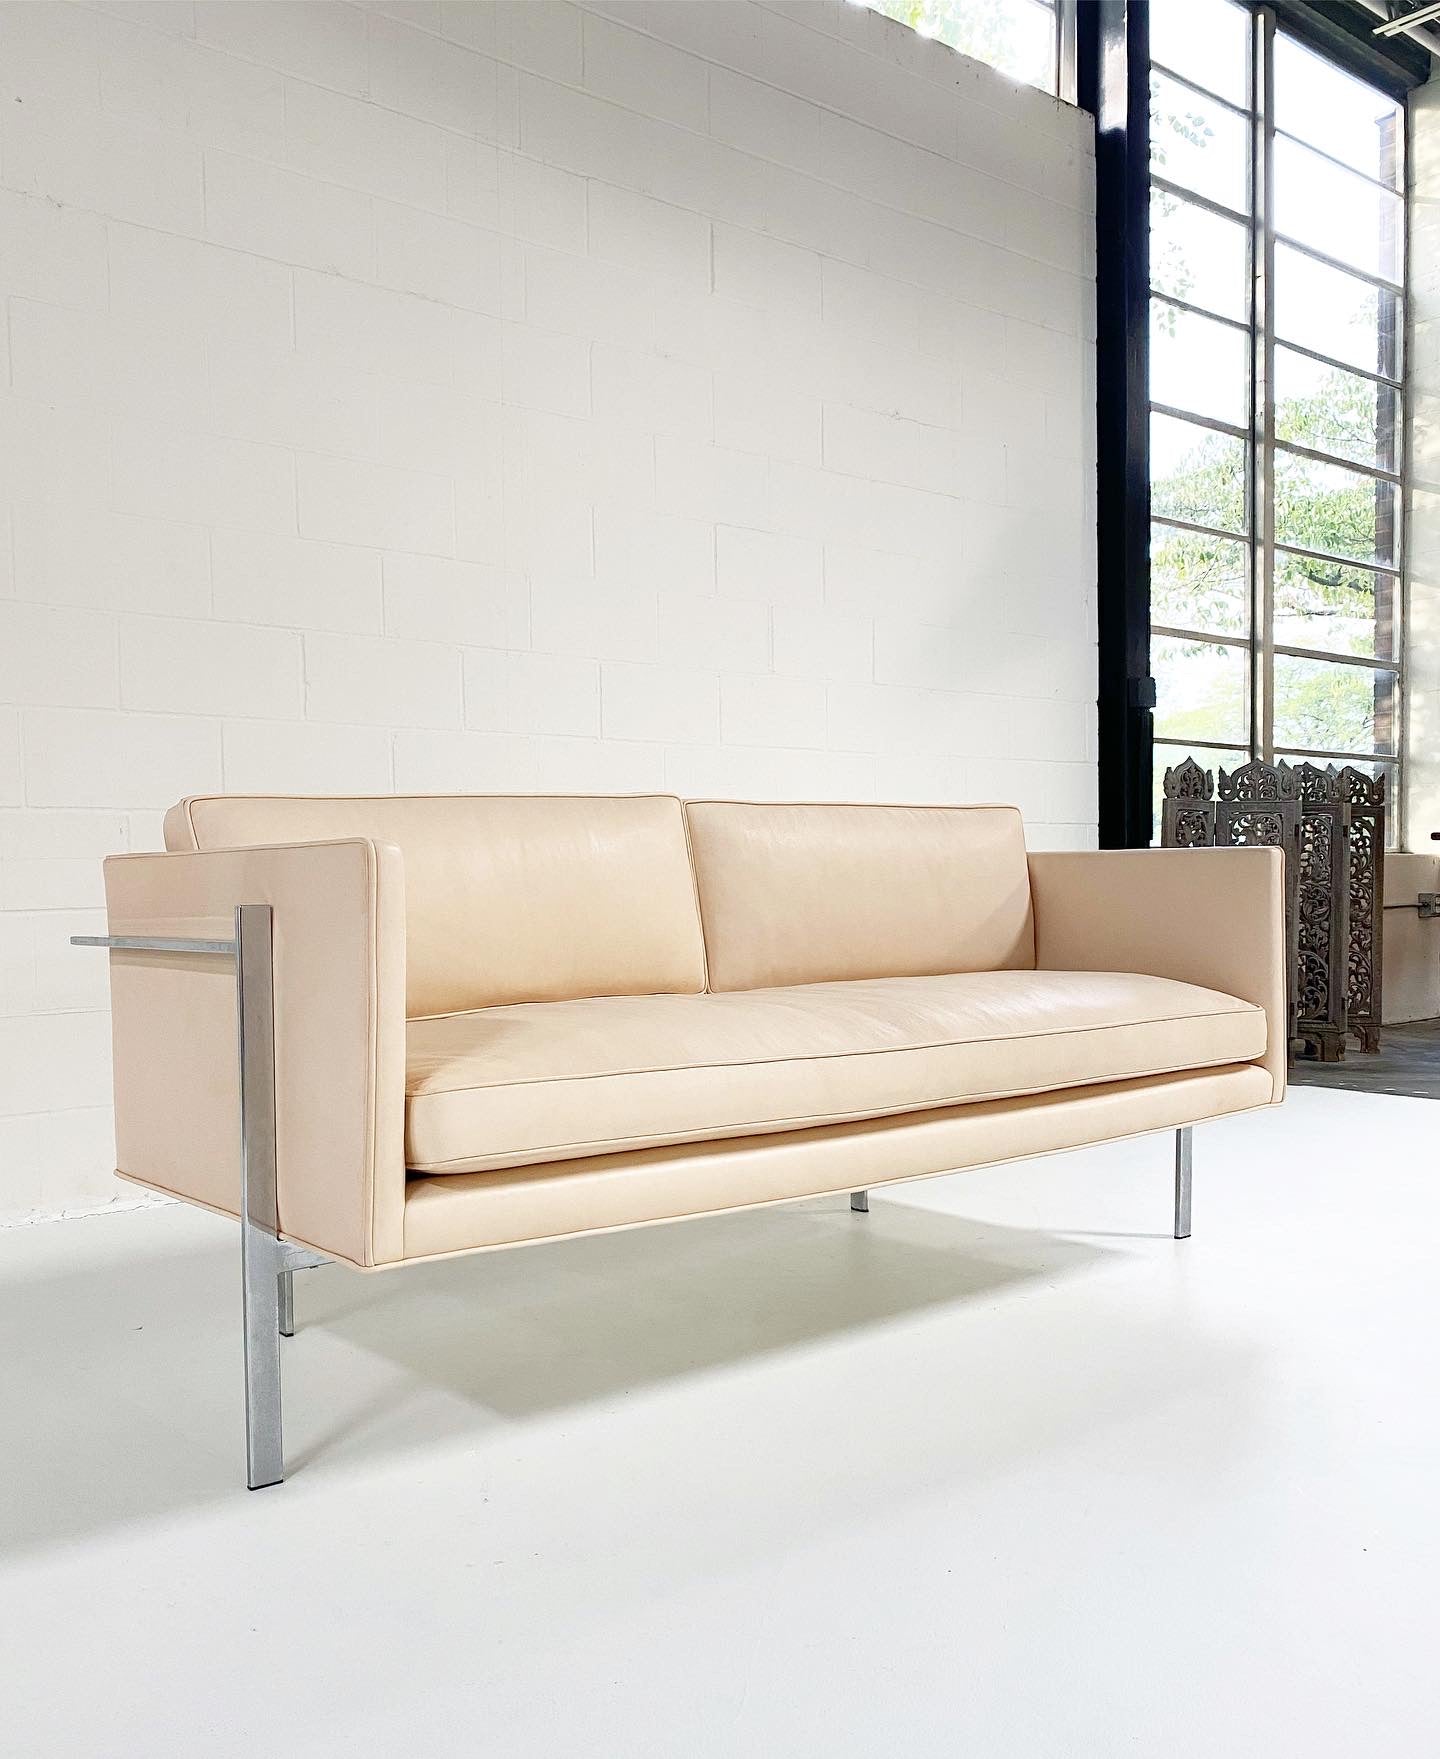 Drop In Sofa in Vegetable Tanned Leather